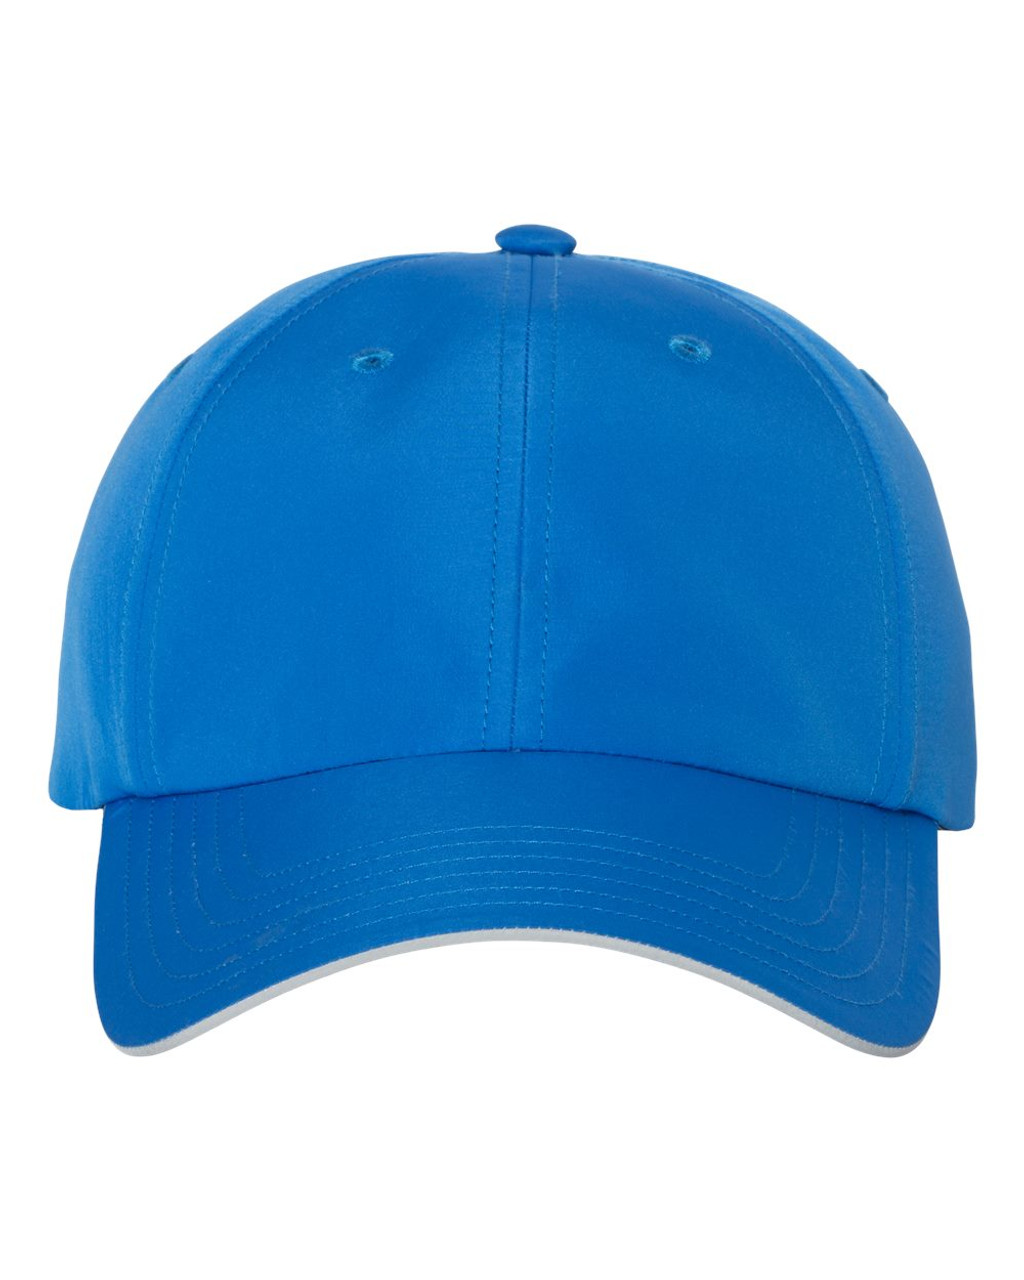 Performance Relaxed Cap - A605 Bright Royal